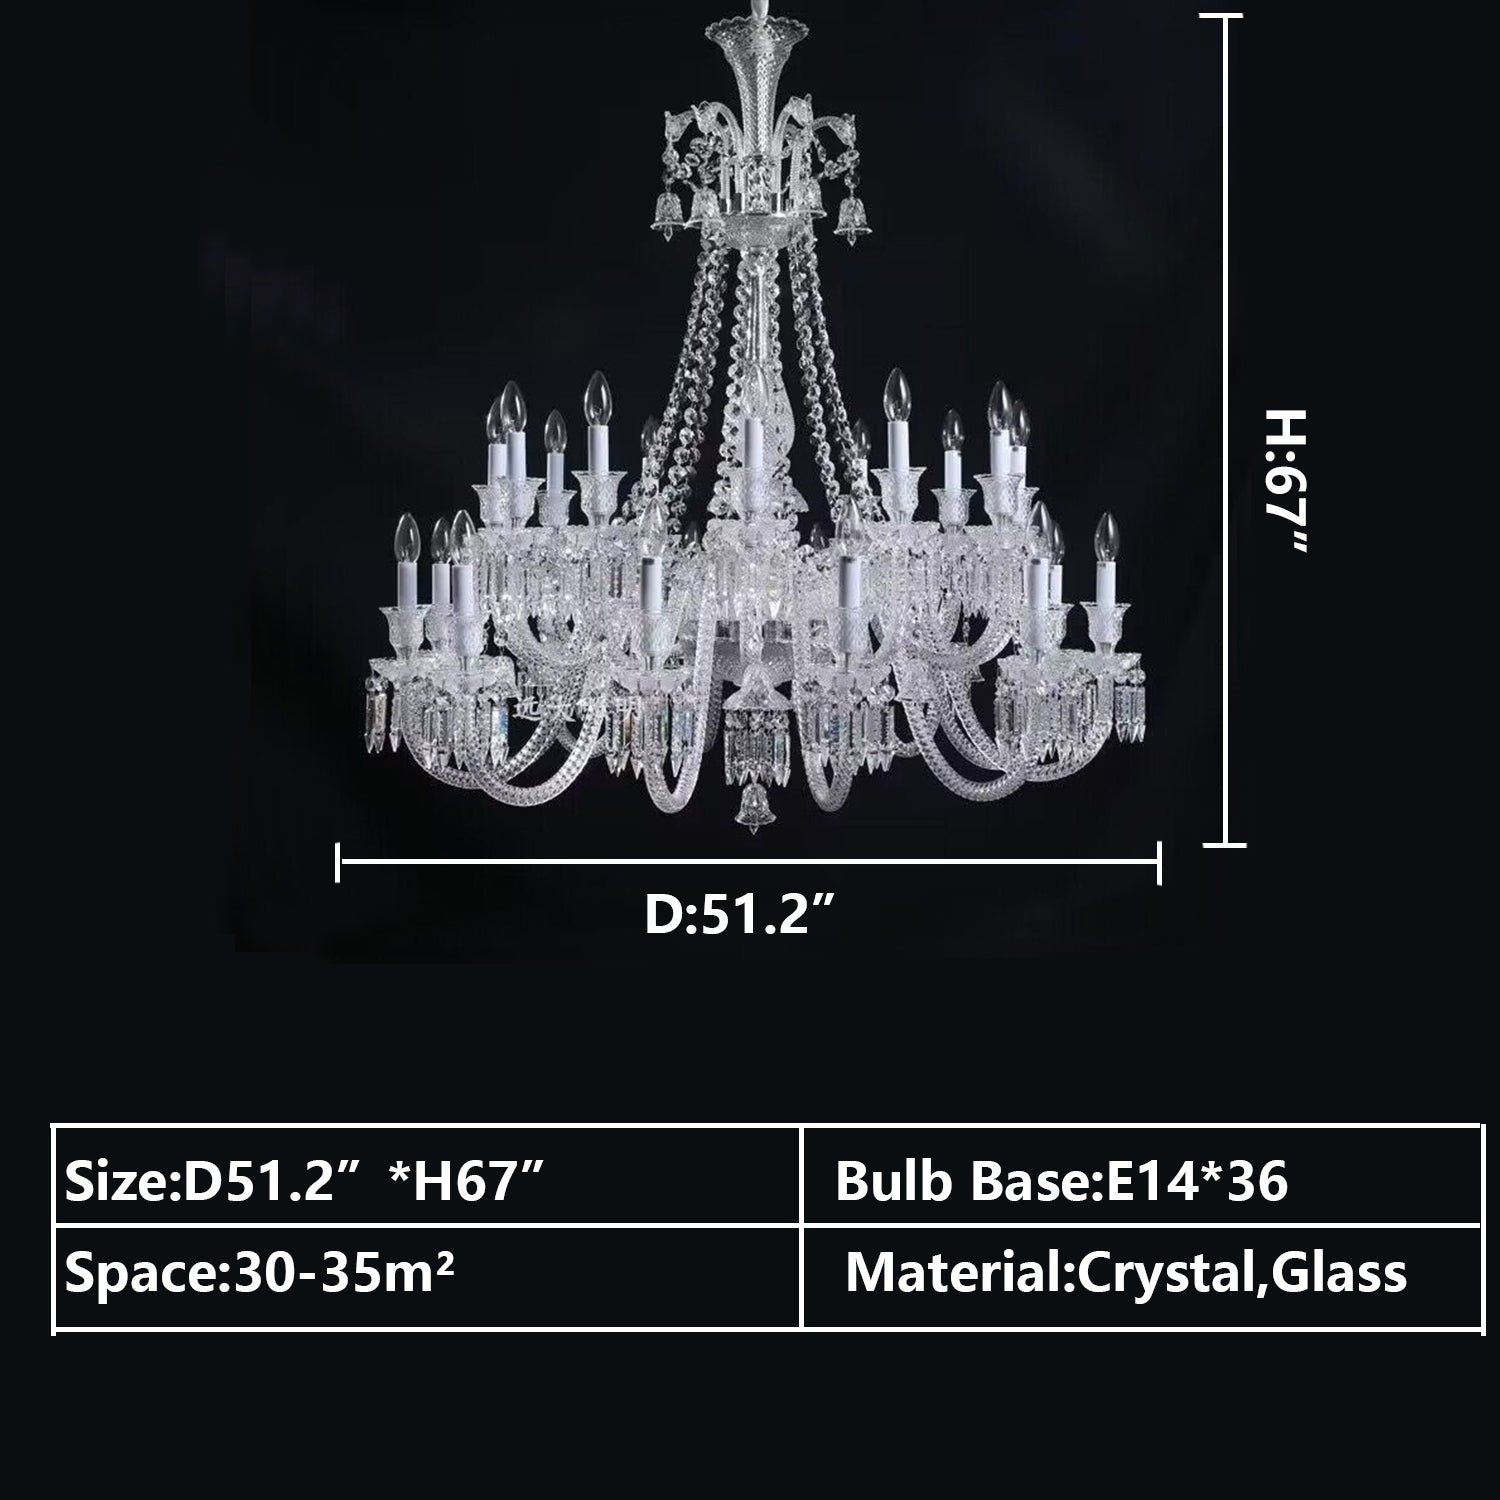 European-style Luxury Colorful Candle Crystal Oversized Chandelier Art Designer Foyer/Staircase Light Fixture Chandeliers Kevinstudiolives   